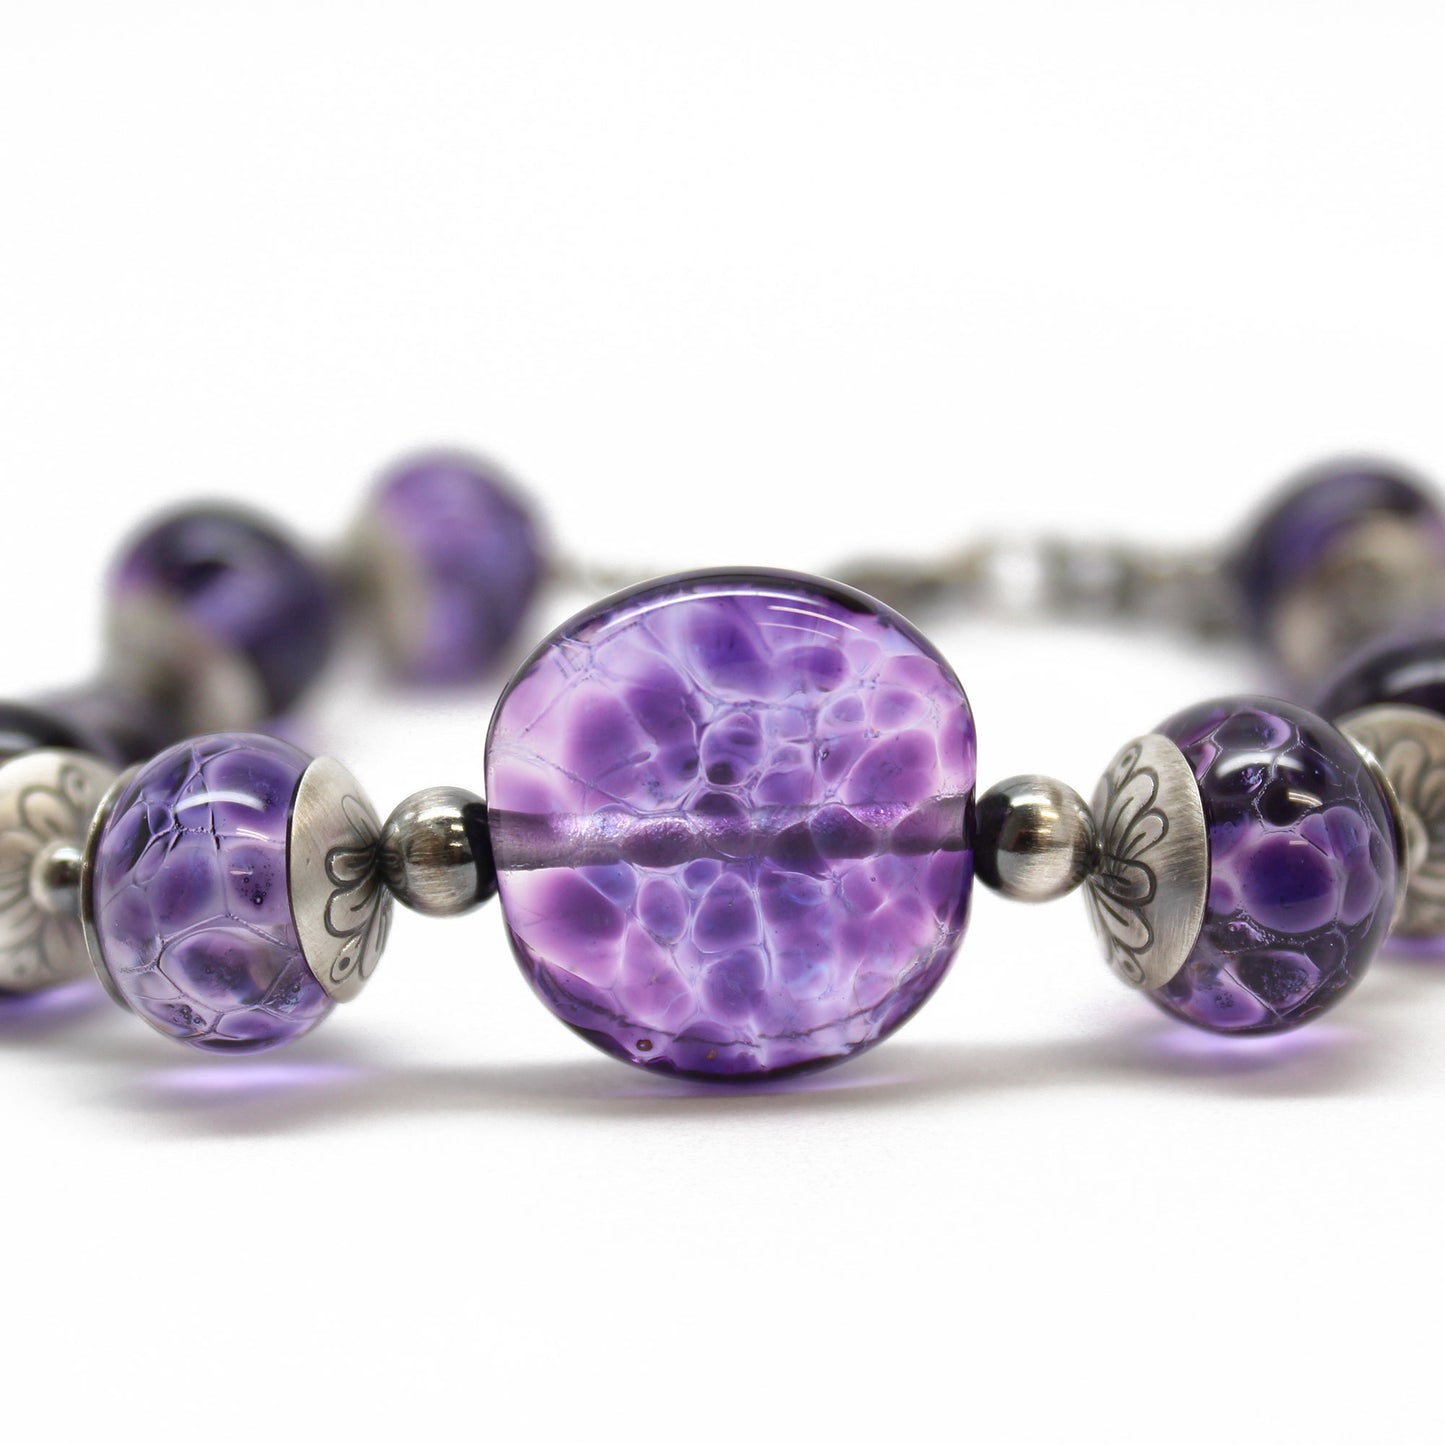 Purple Lampwork Bead Bracelet in Sterling Silver, Adjustable 8 to 9.25 Inches